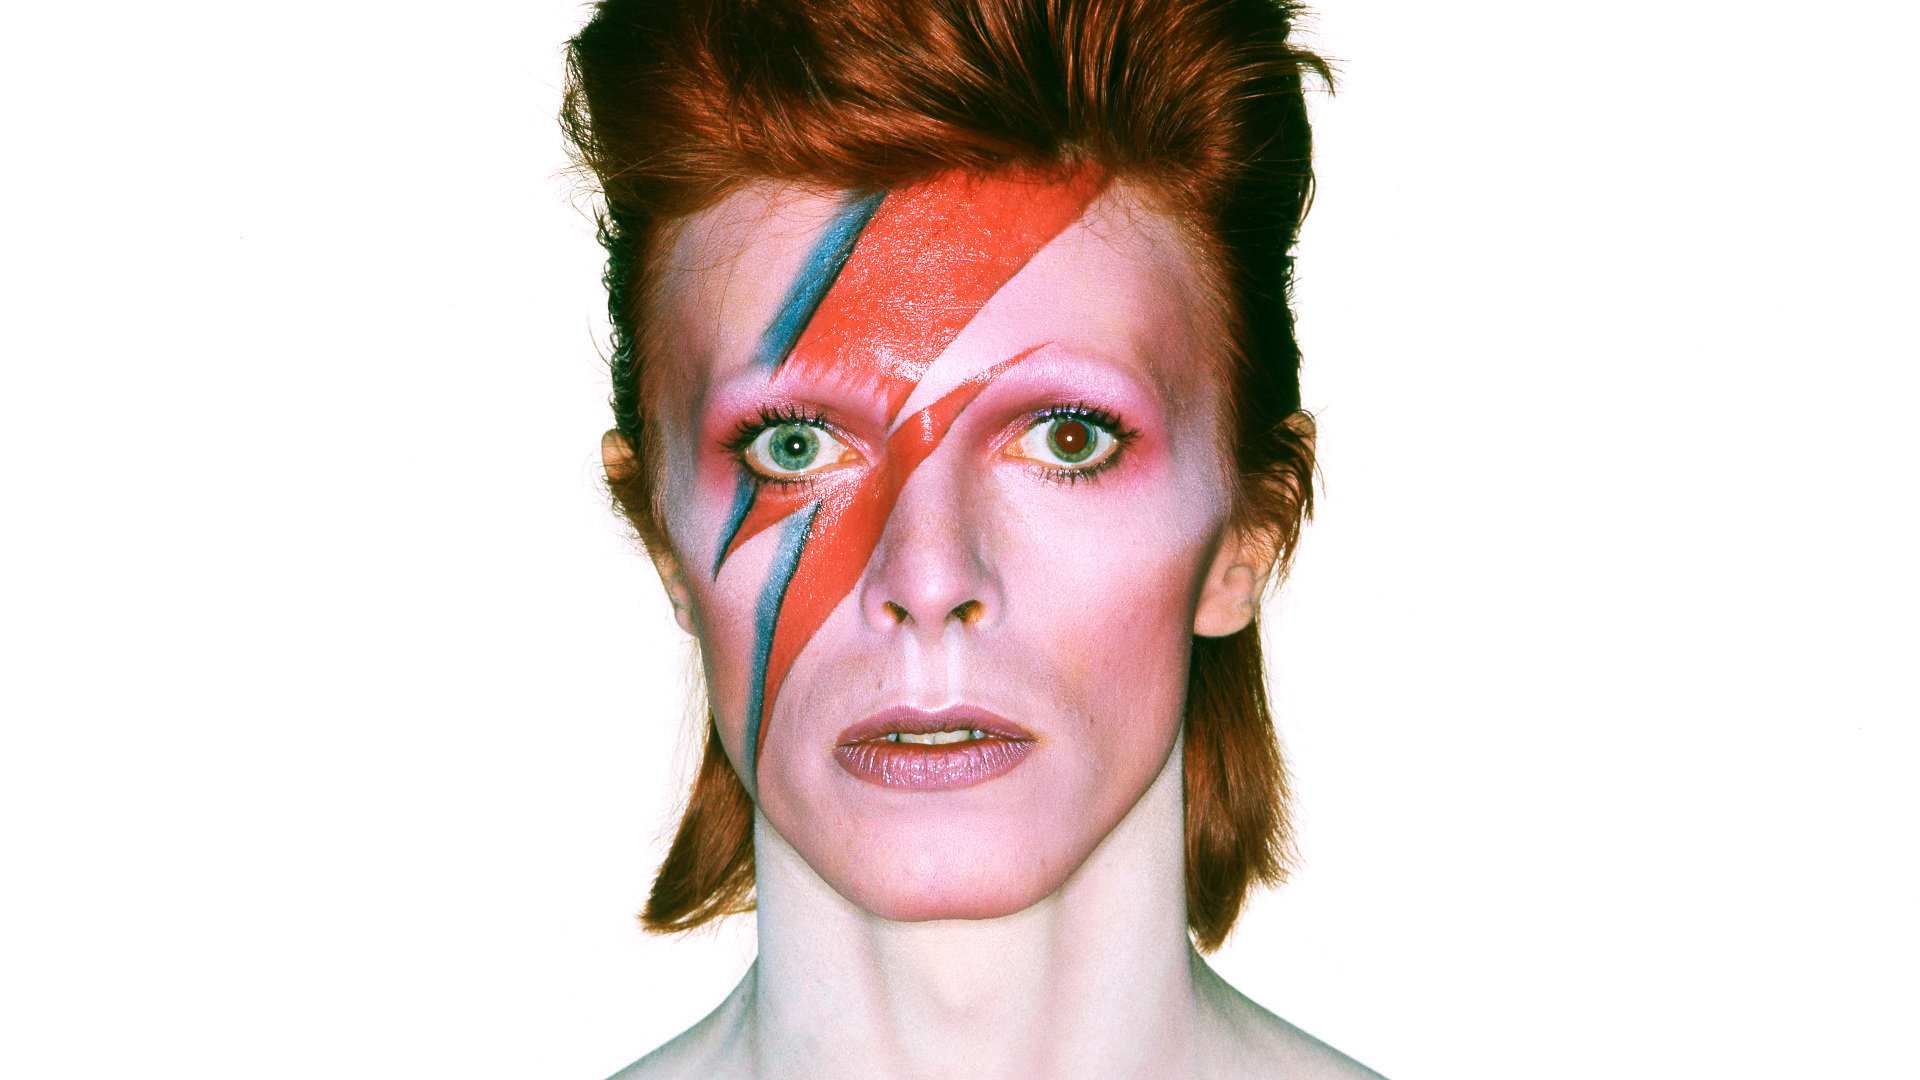 Awesome David Bowie free wallpaper ID:135288 for full hd 1920x1080 desktop